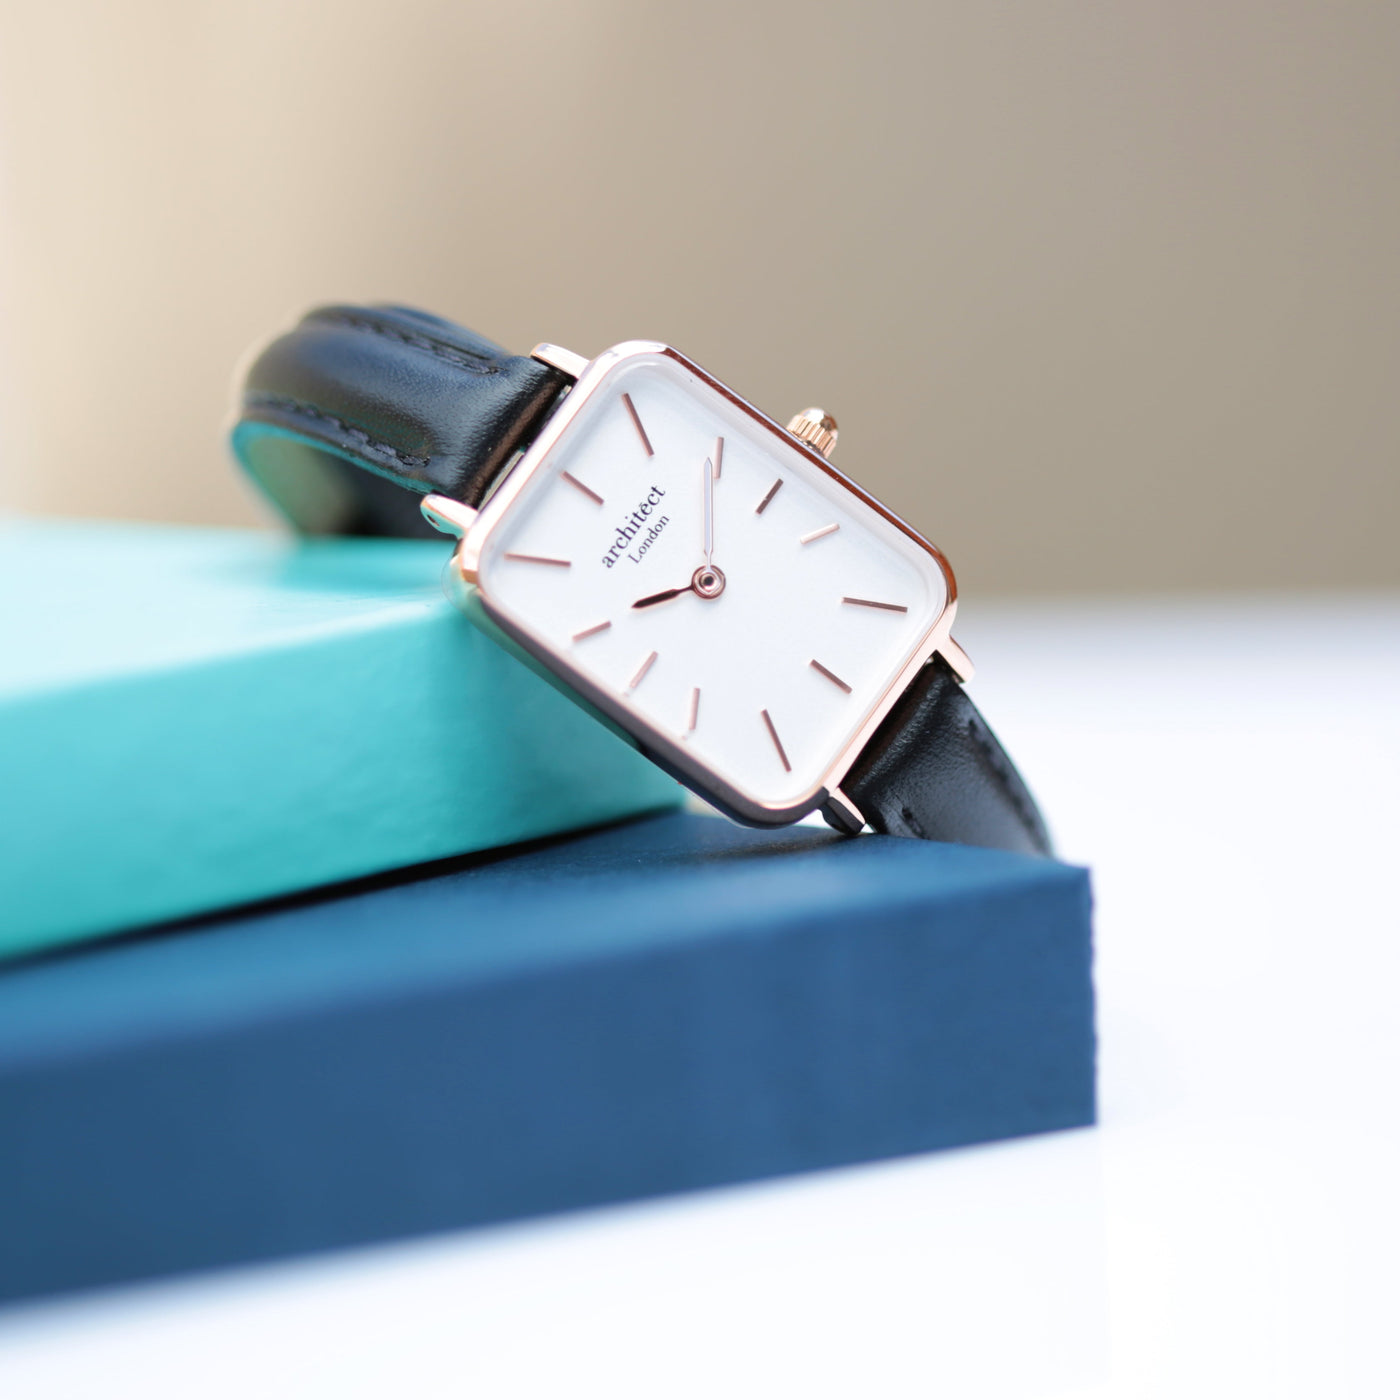 Ladies Architect Lille Watch - Brilliant White  - Handwriting Engraving